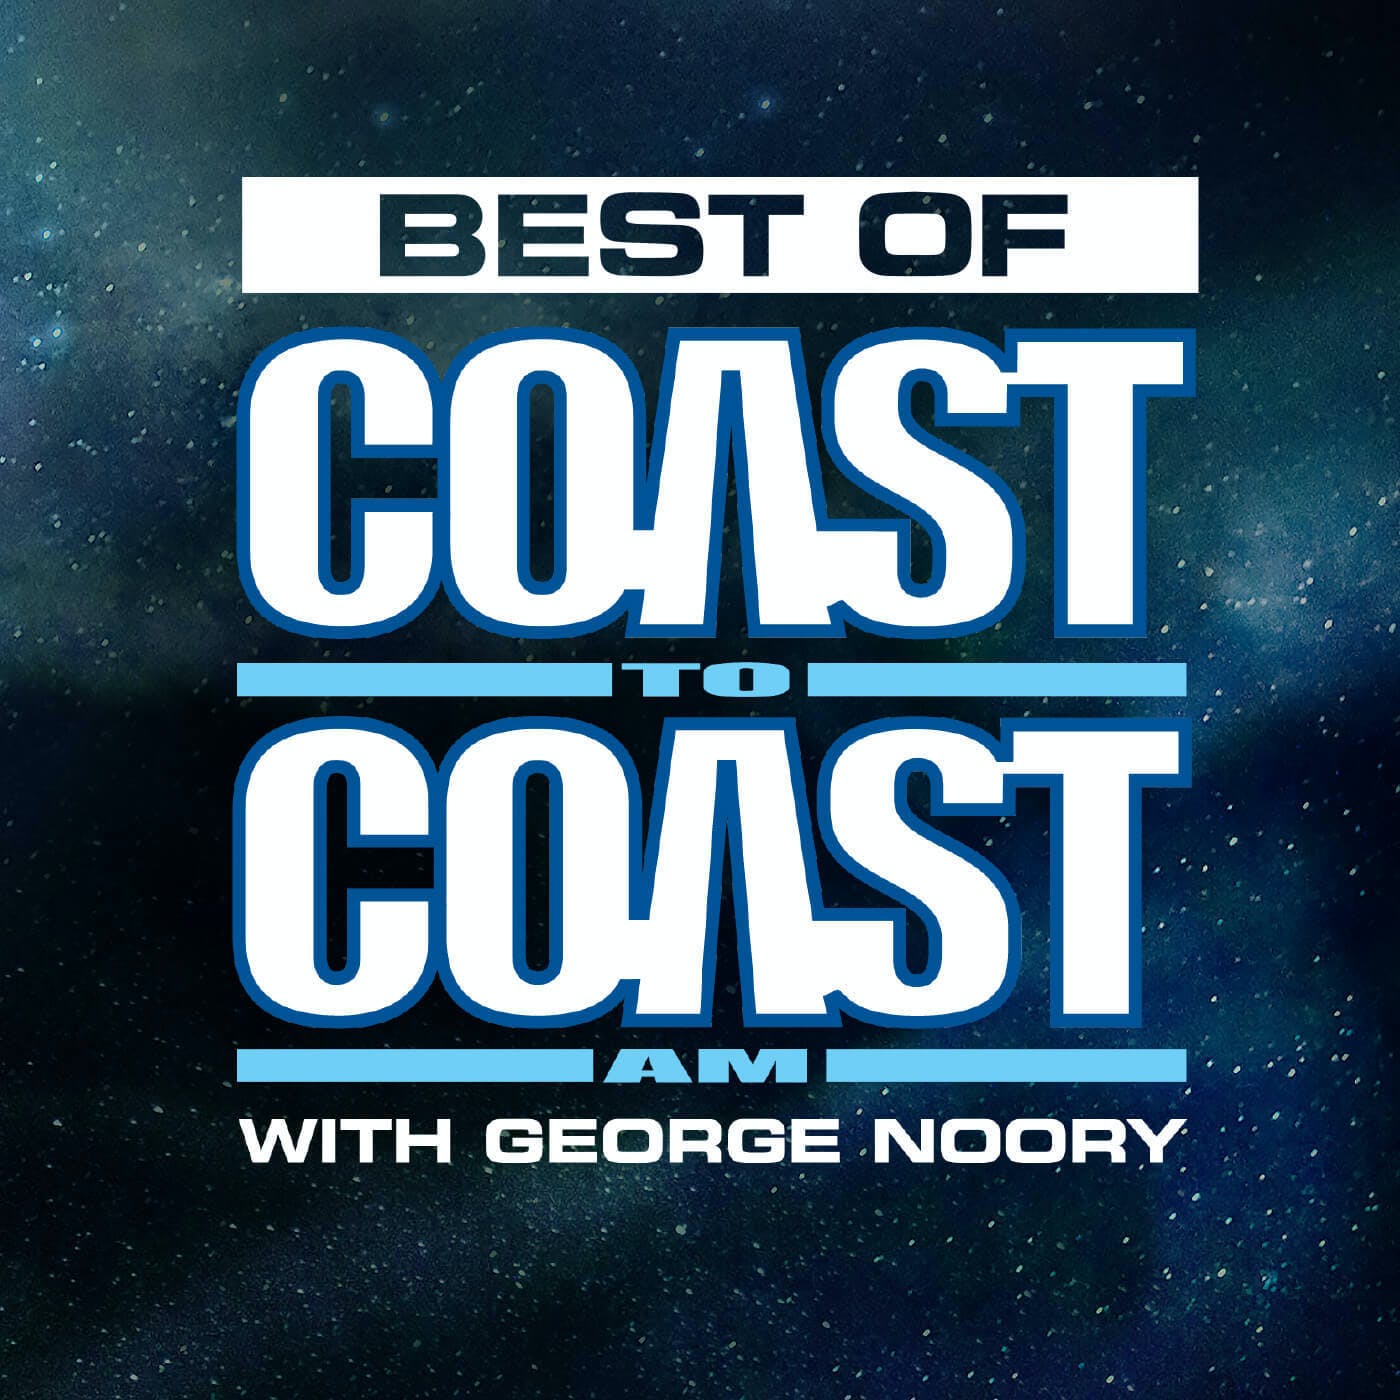 Online Business - Best of Coast to Coast AM - 9/10/21